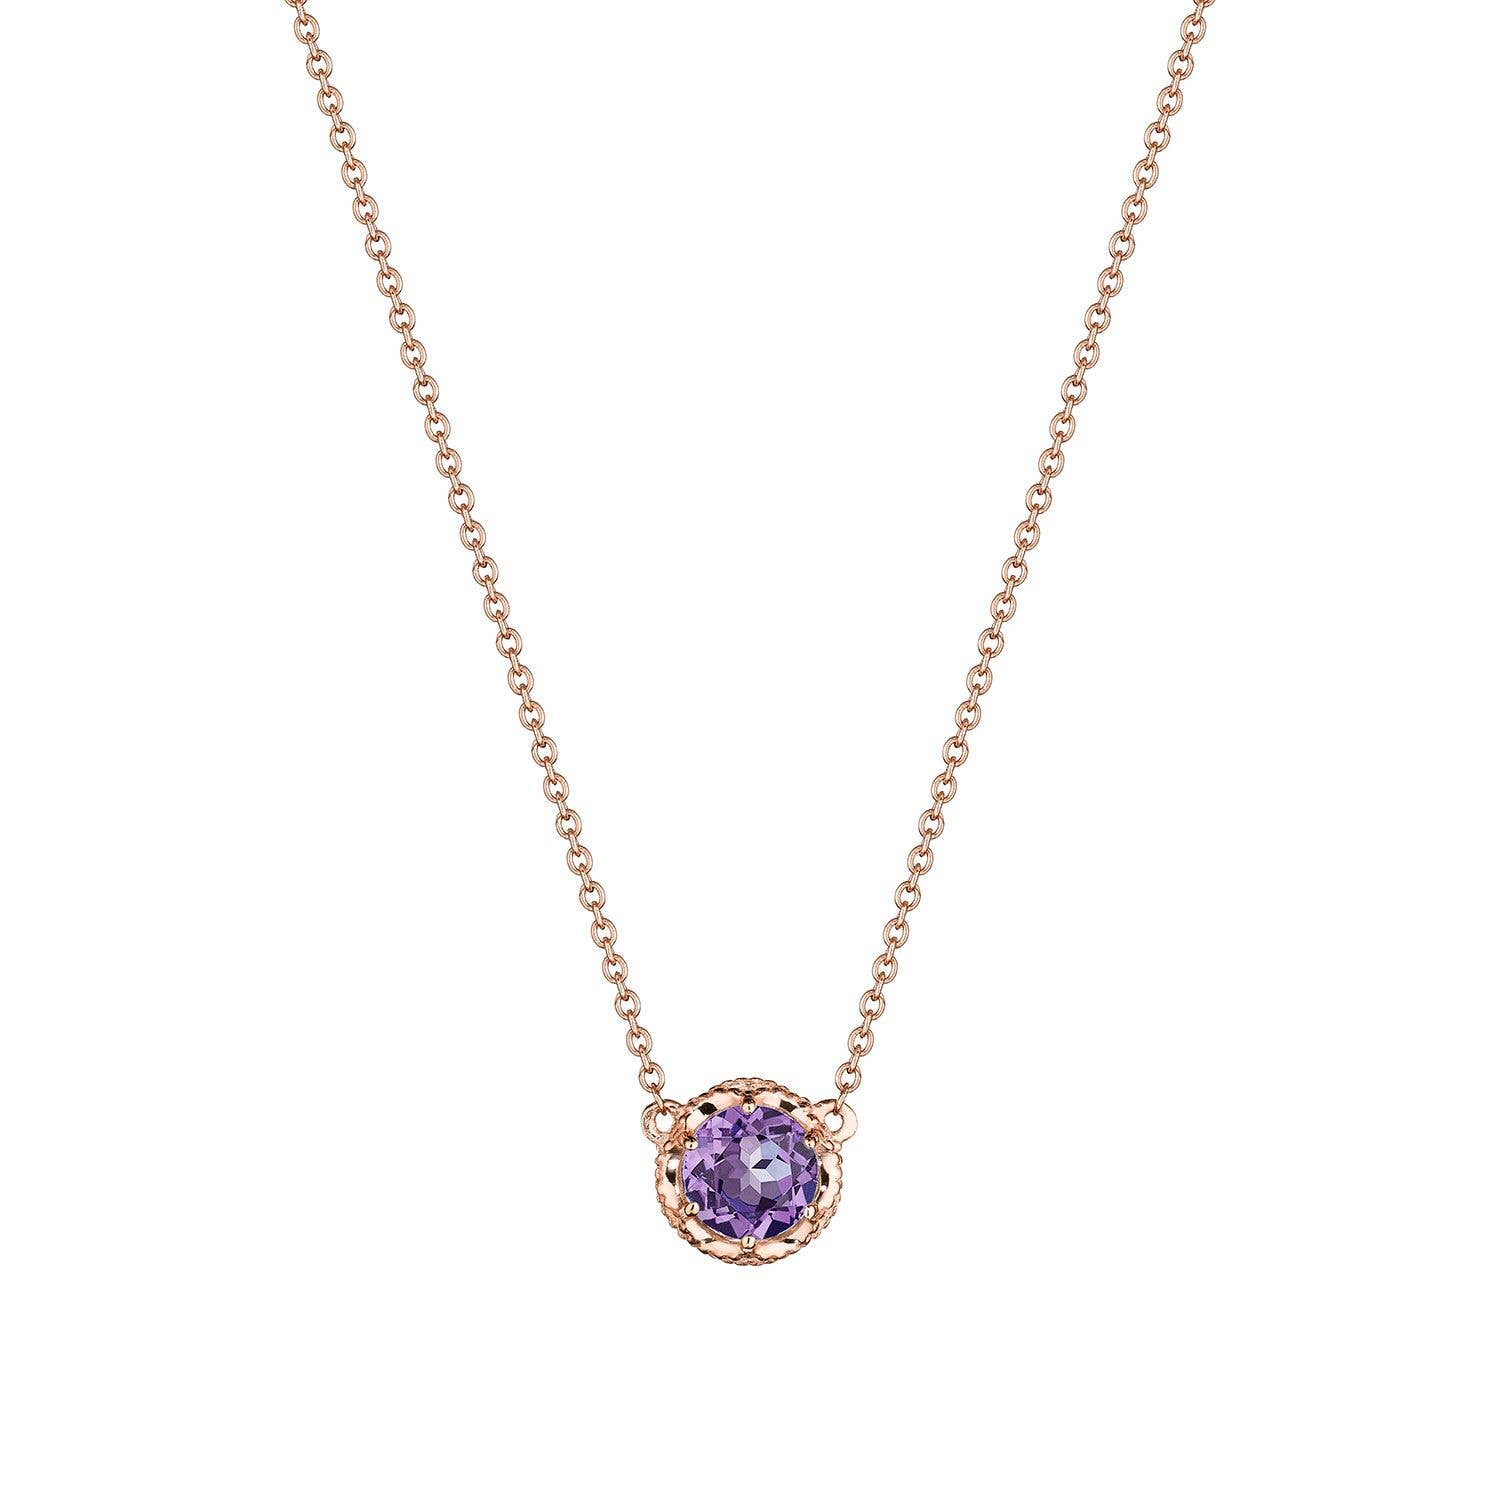 Petite Crescent Station Necklace featuring Amethyst